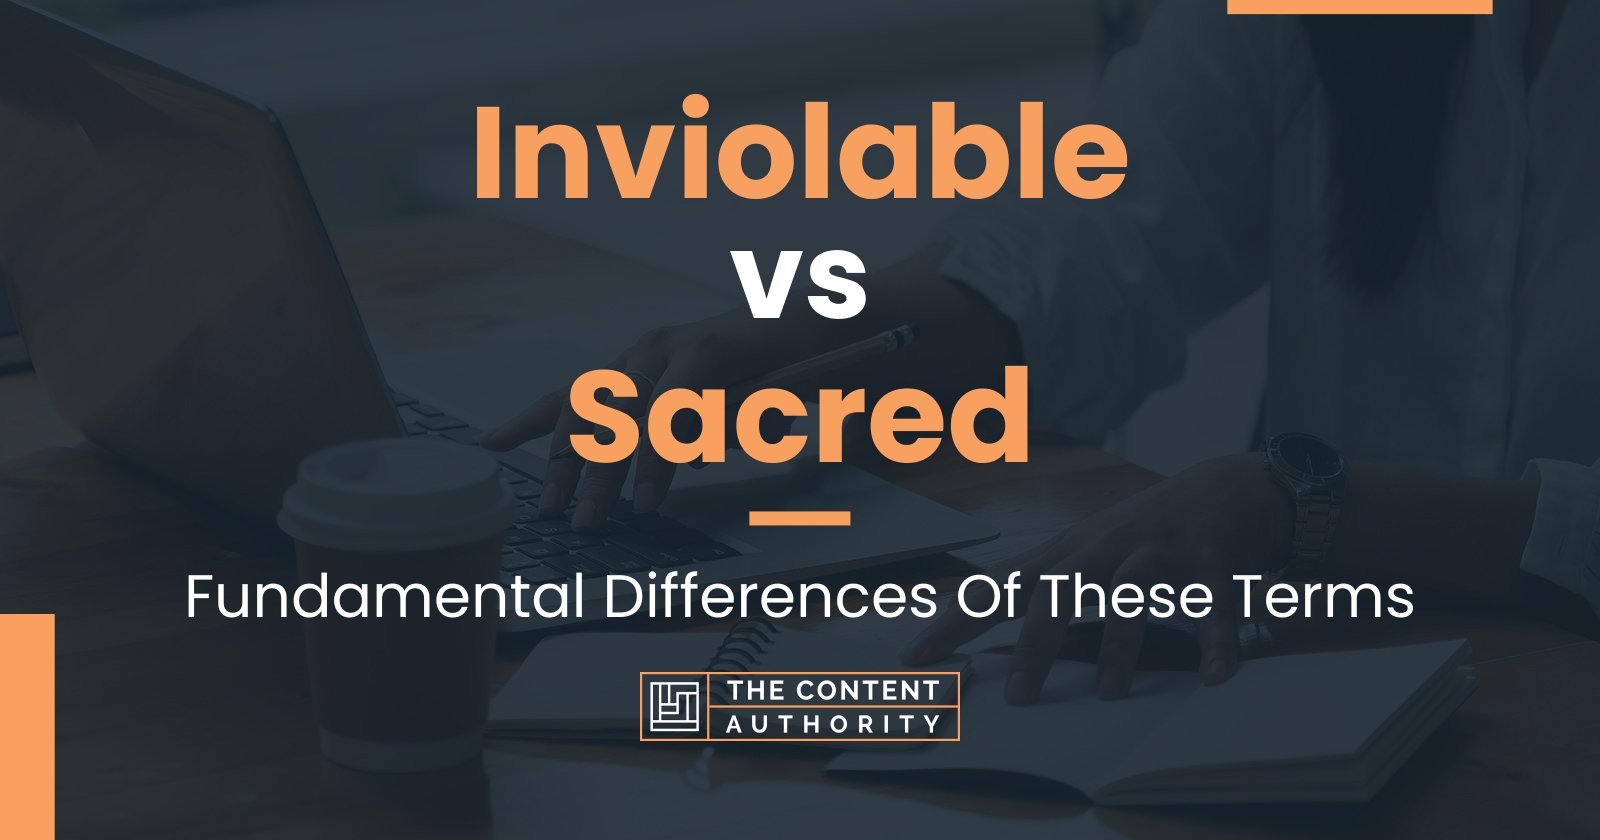 Inviolable vs Sacred: Fundamental Differences Of These Terms